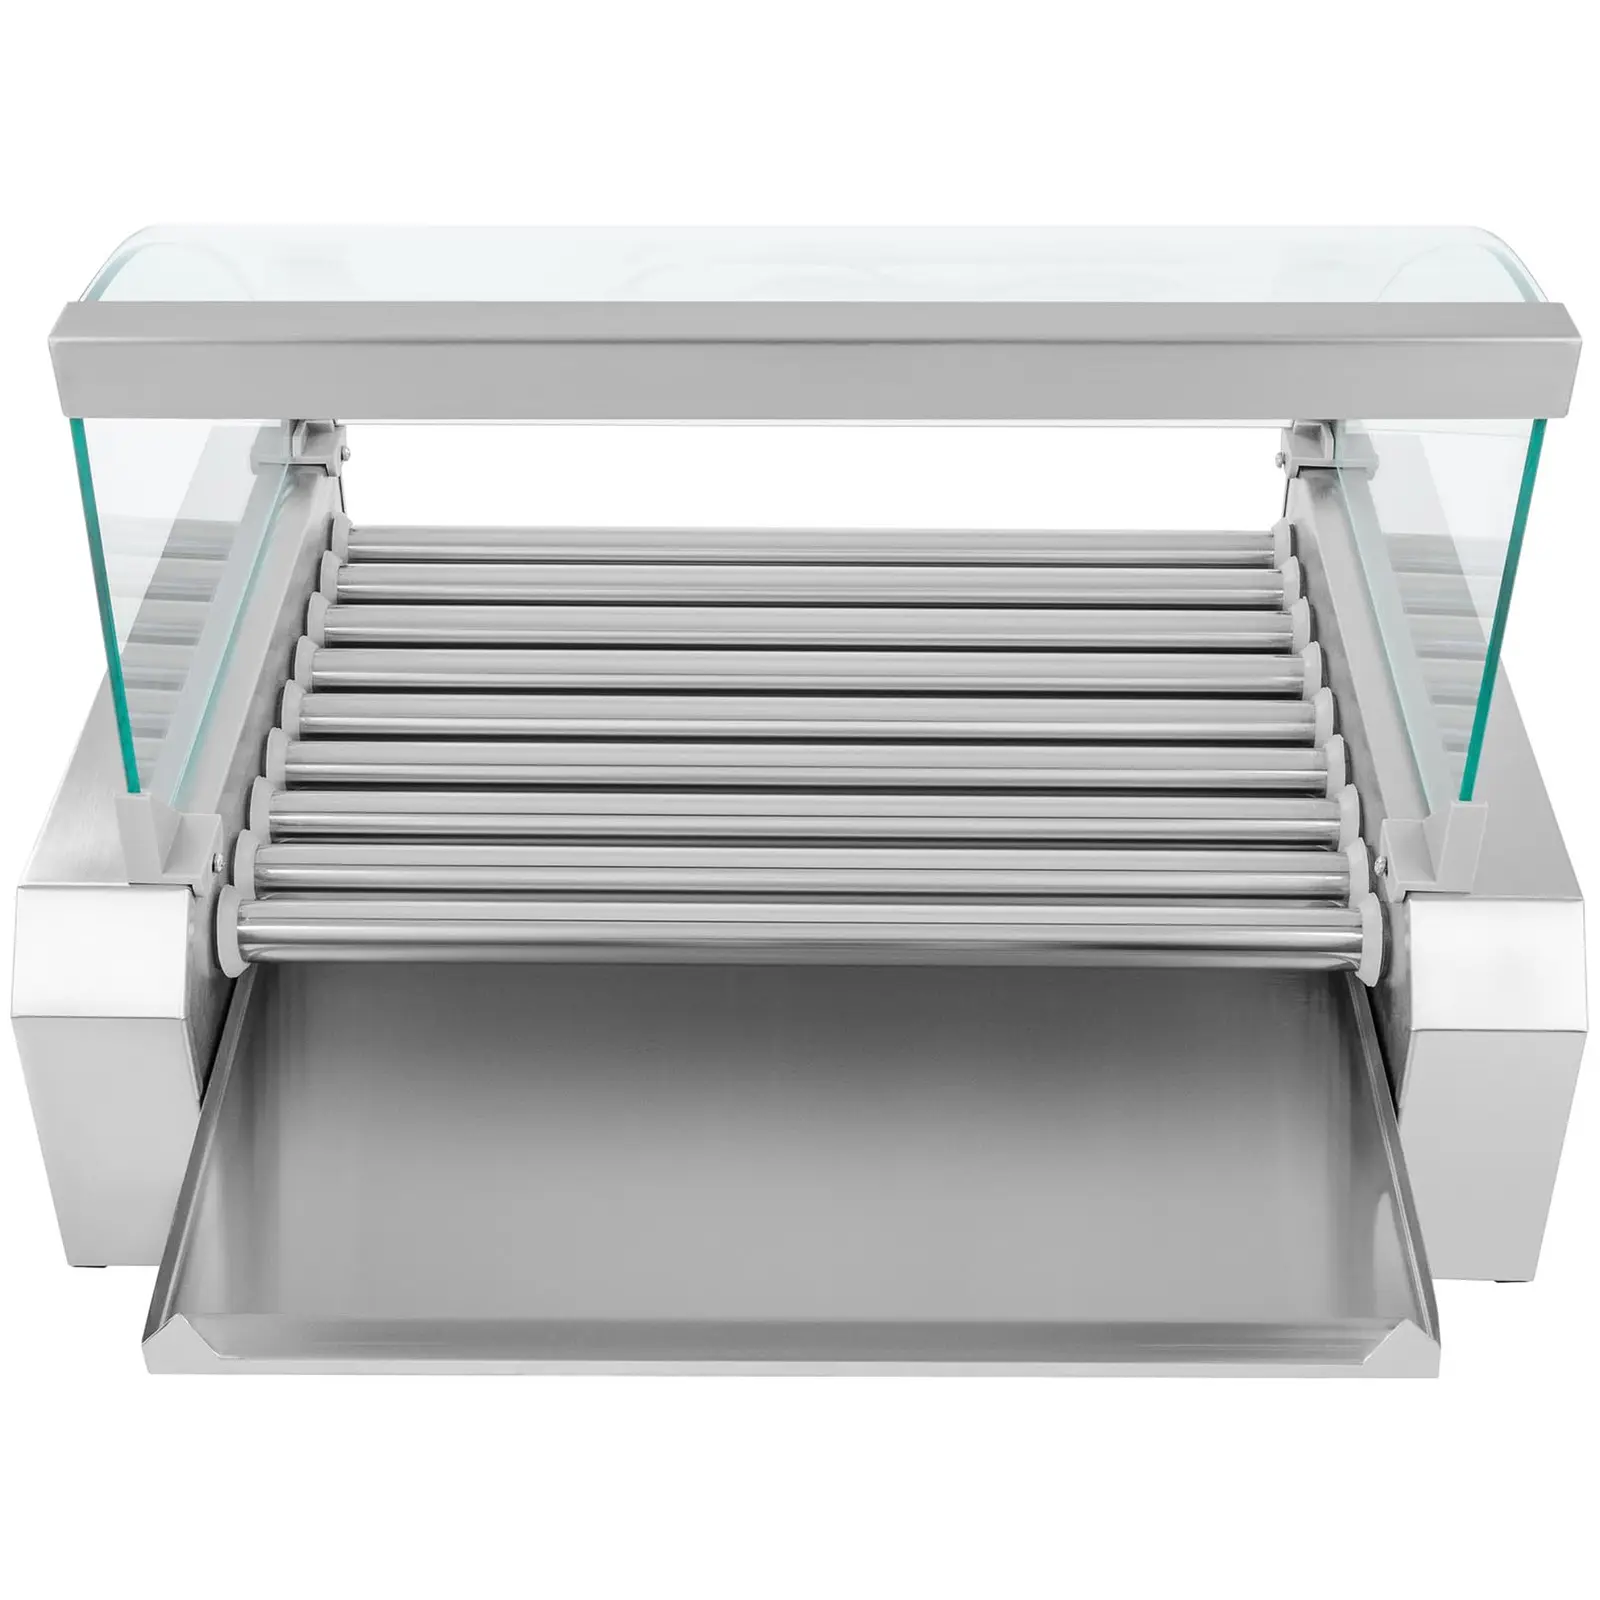 Hot Dog Grill - 9 rollers - stainless steel